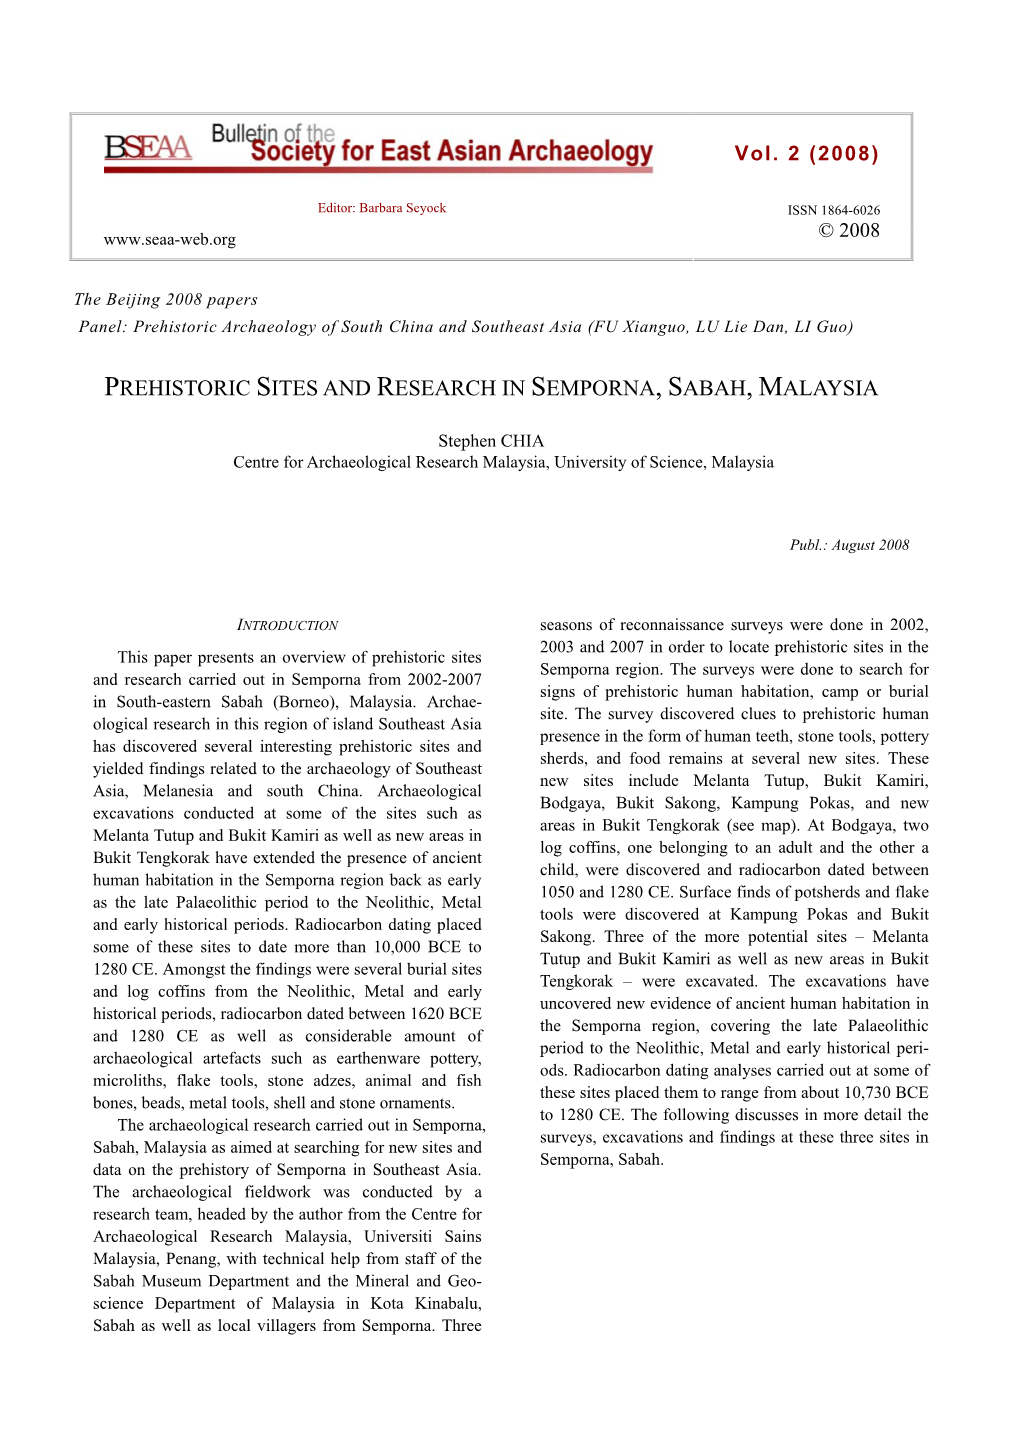 Stephen CHIA: Prehistoric Sites and Research in Semporna, Sabah, Malaysia